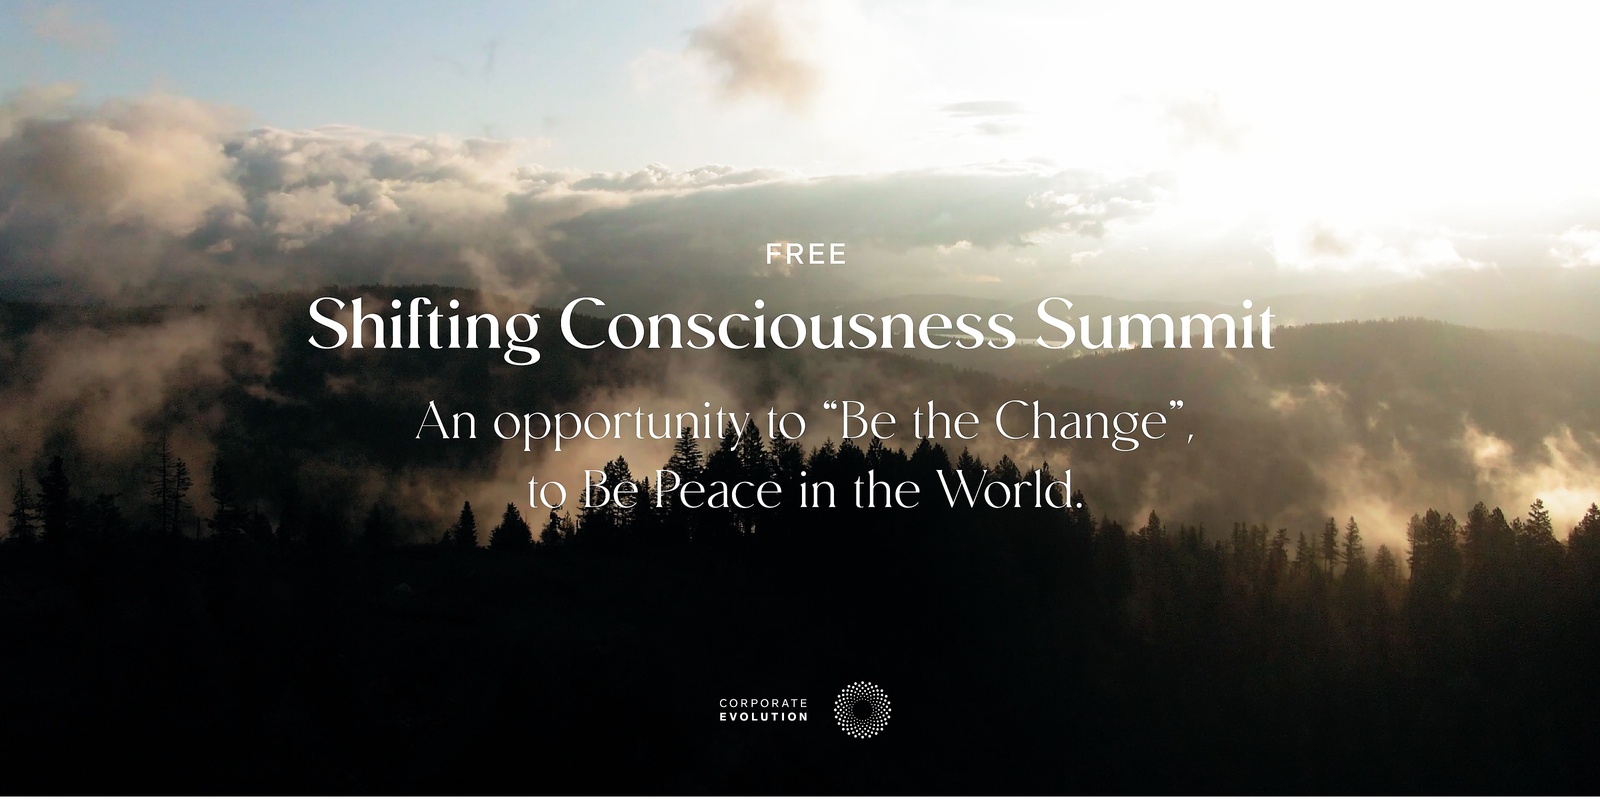 Banner image for Corporate Evolution's FREE Shifting Consciousness Summit 1 (Europe/Australia Timezone)